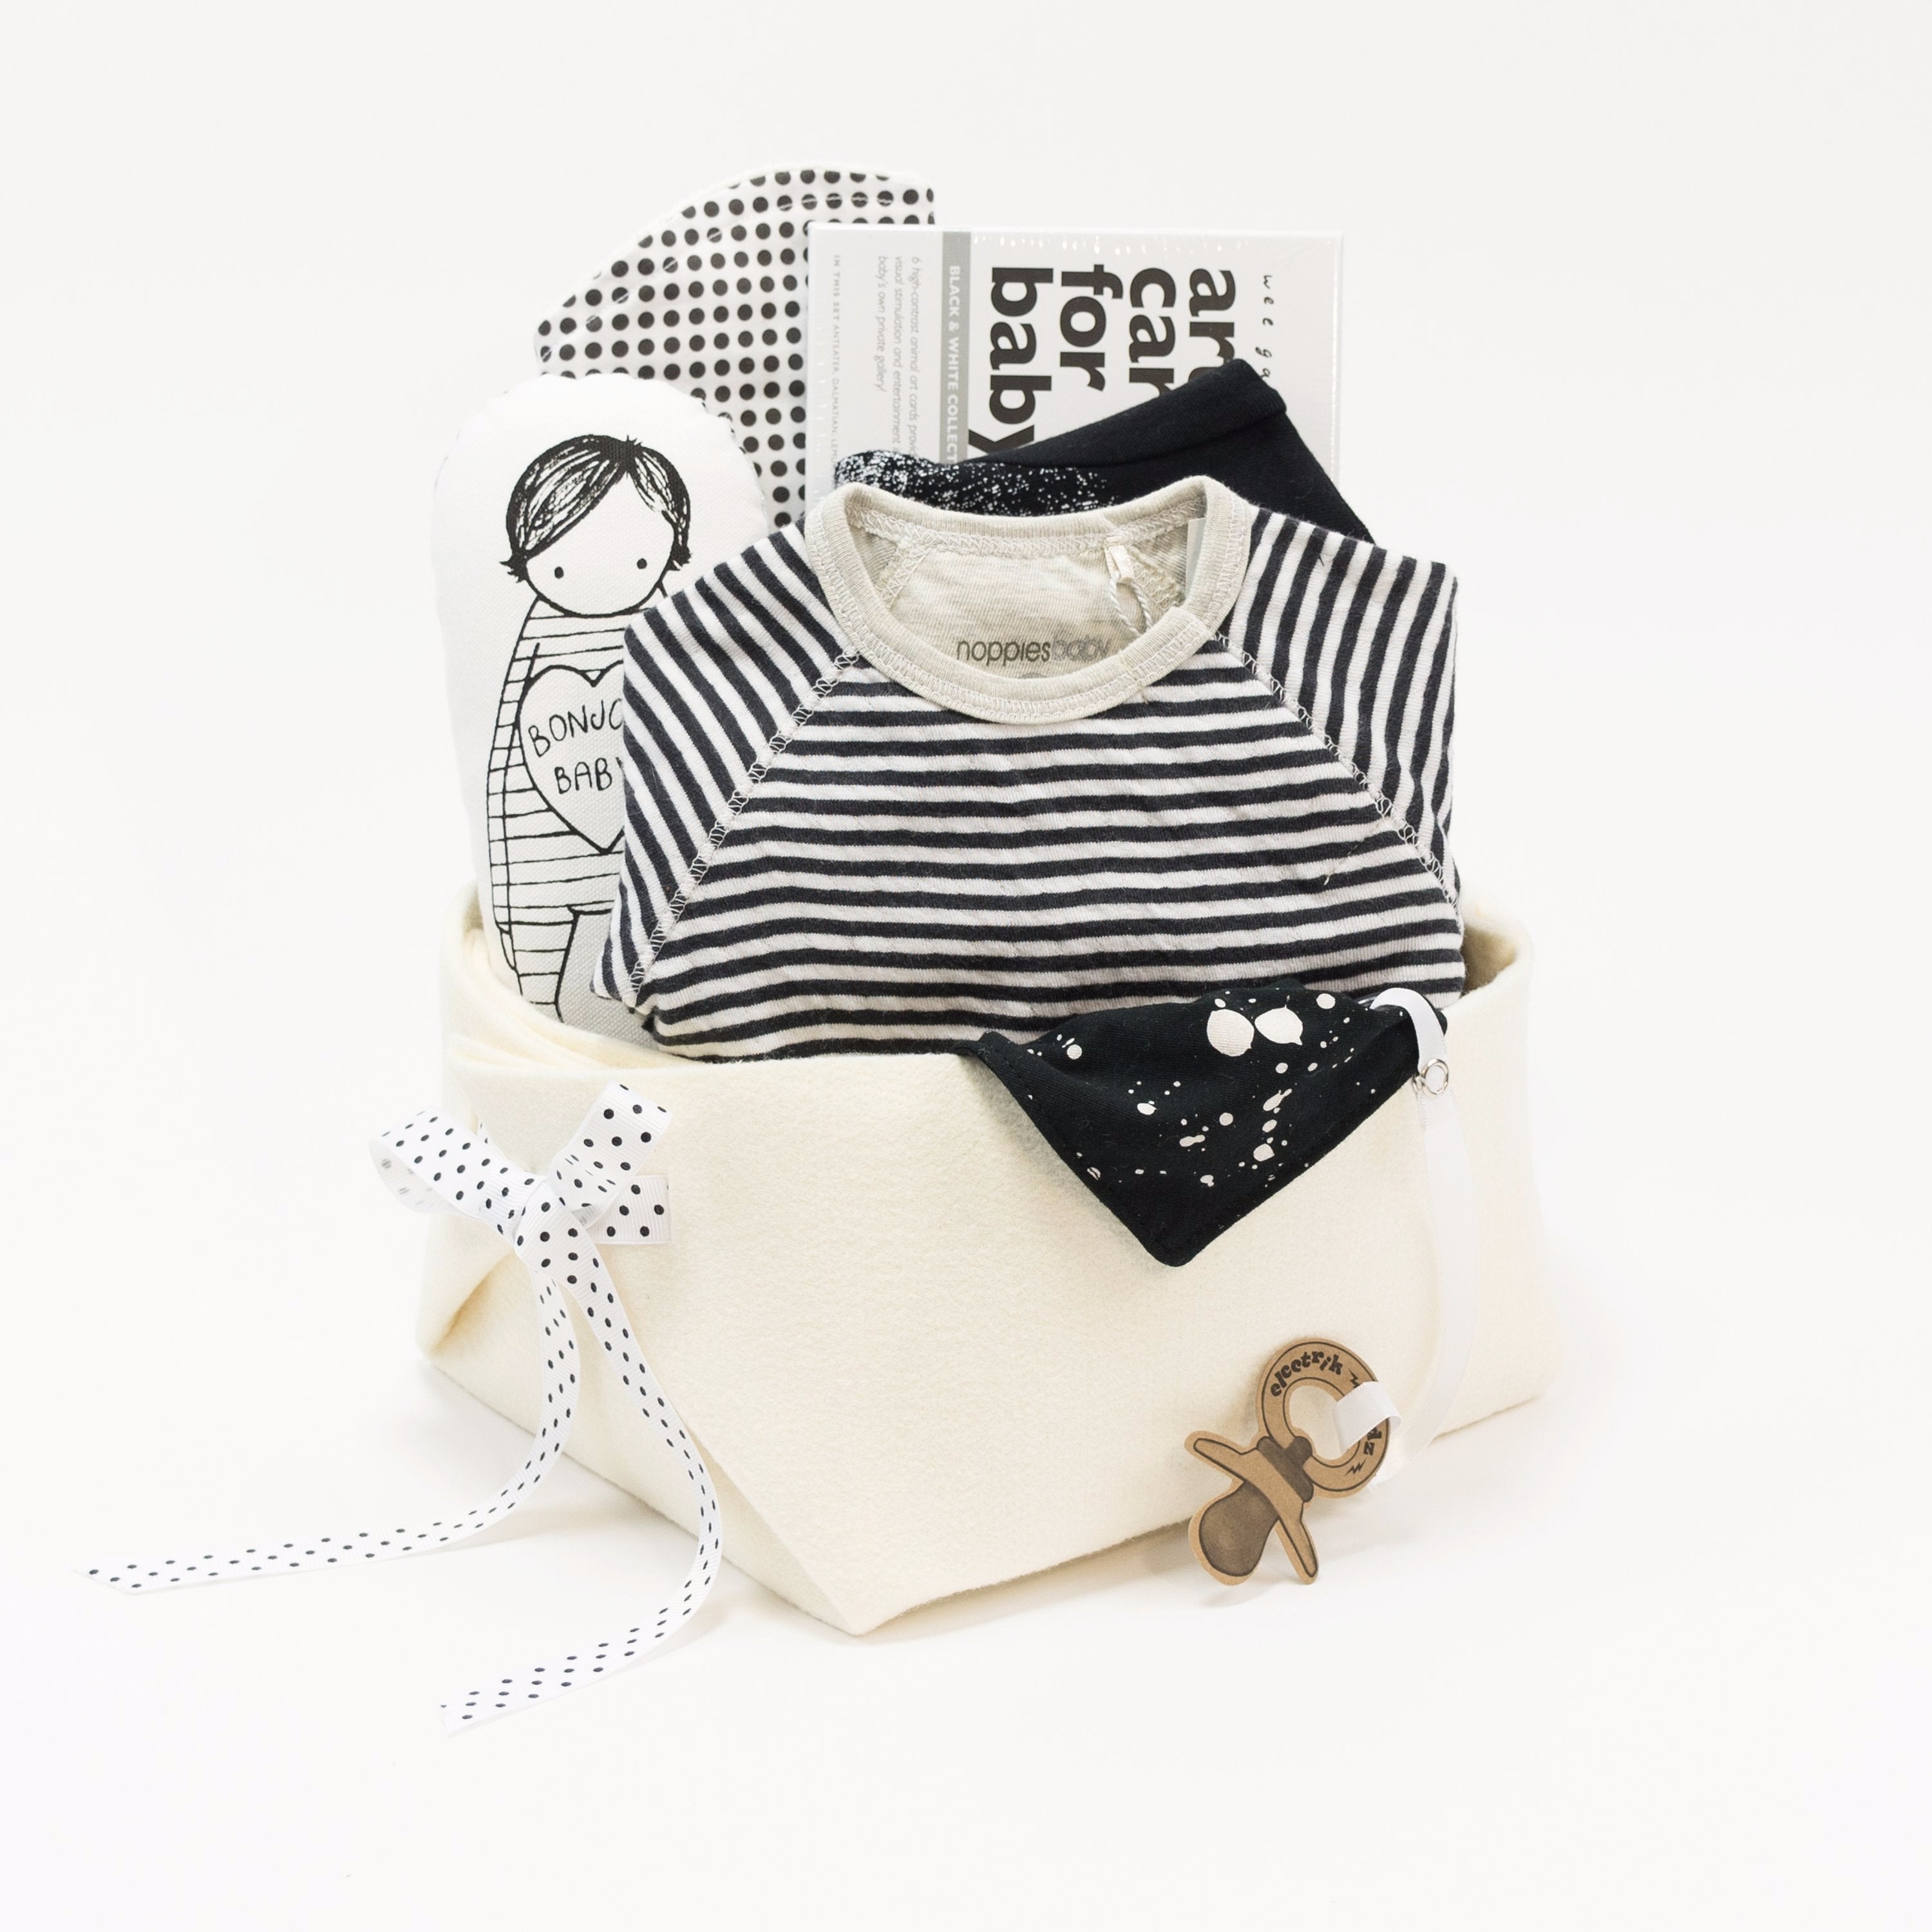 Monochrome Baby Gift Basket at Bonjour Baby Baskets